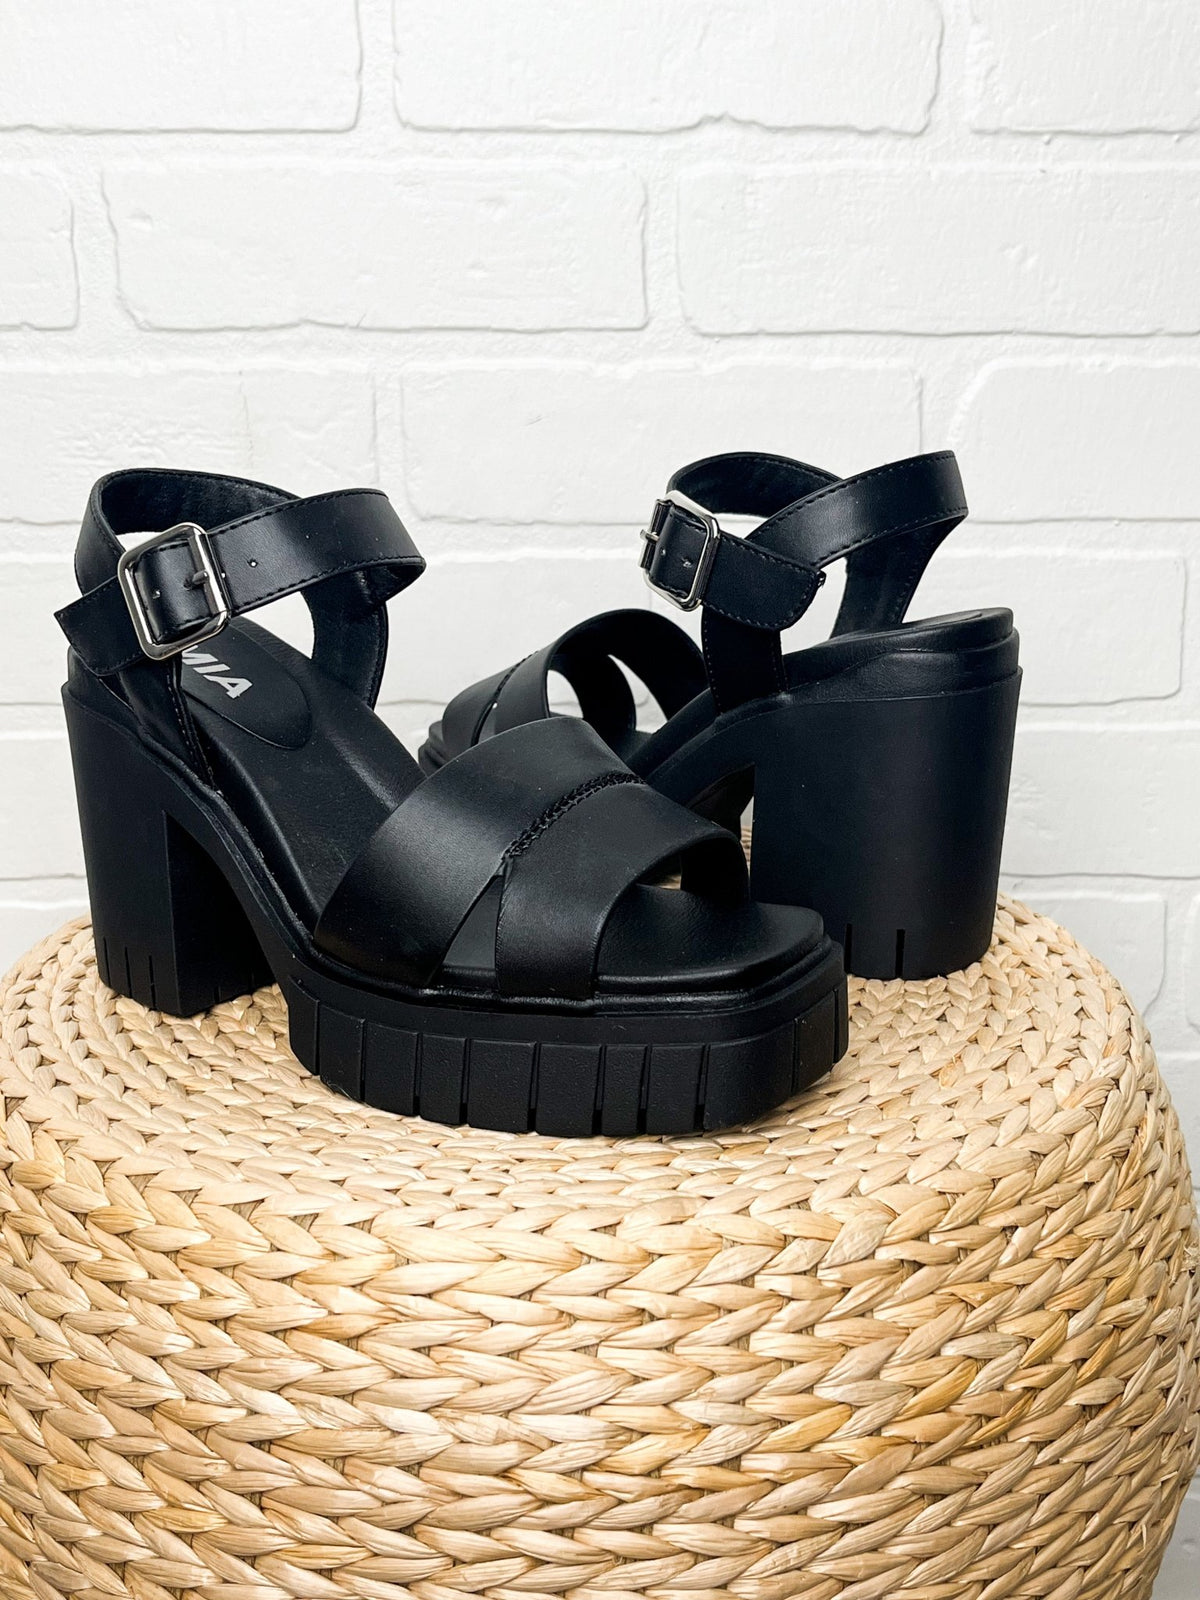 Nivea chunky sandal black - Cute Shoes - Trendy Shoes at Lush Fashion Lounge Boutique in Oklahoma City